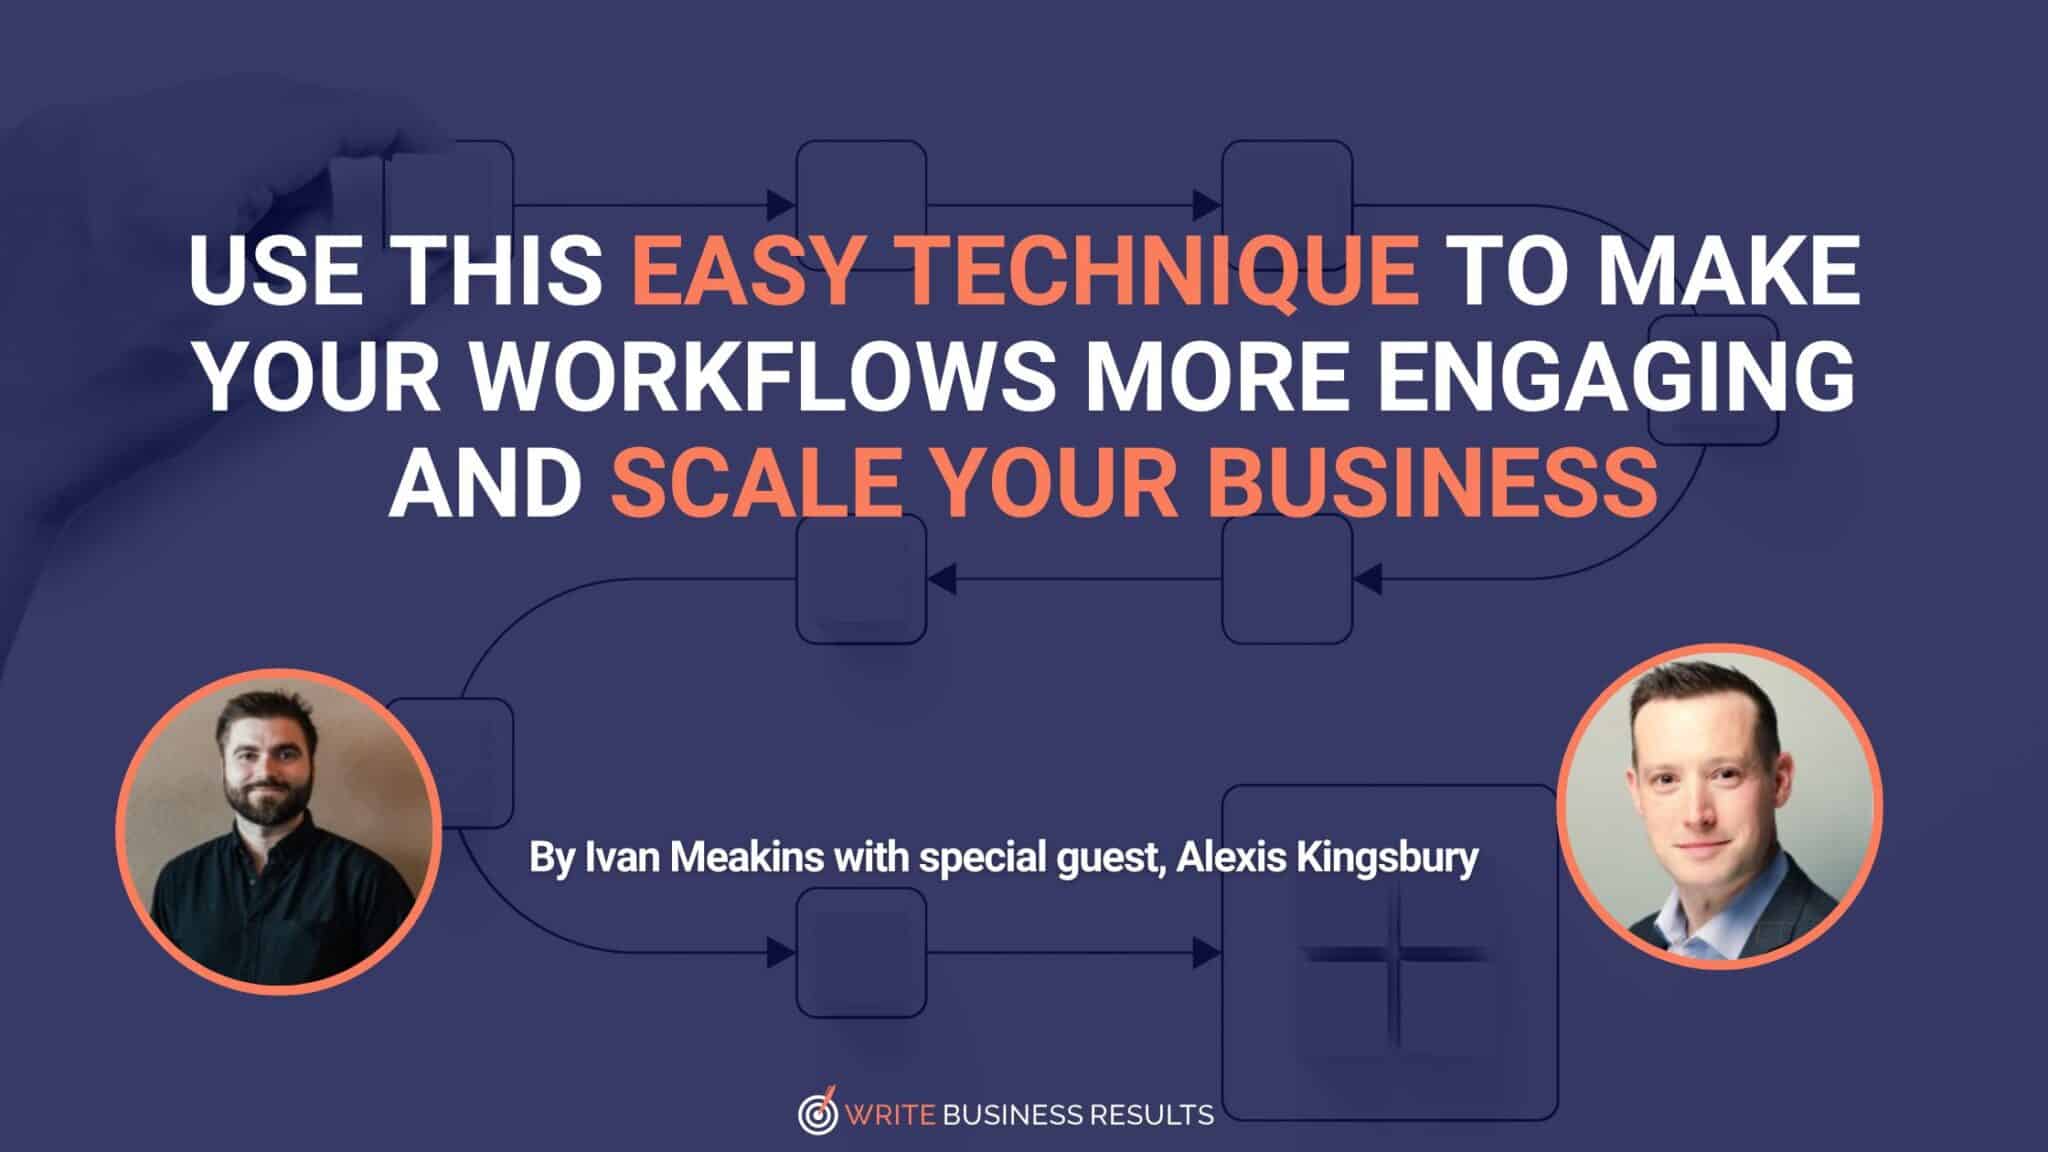 Use This Easy Technique To Make Your Workflows More Engaging And Scale Your Business